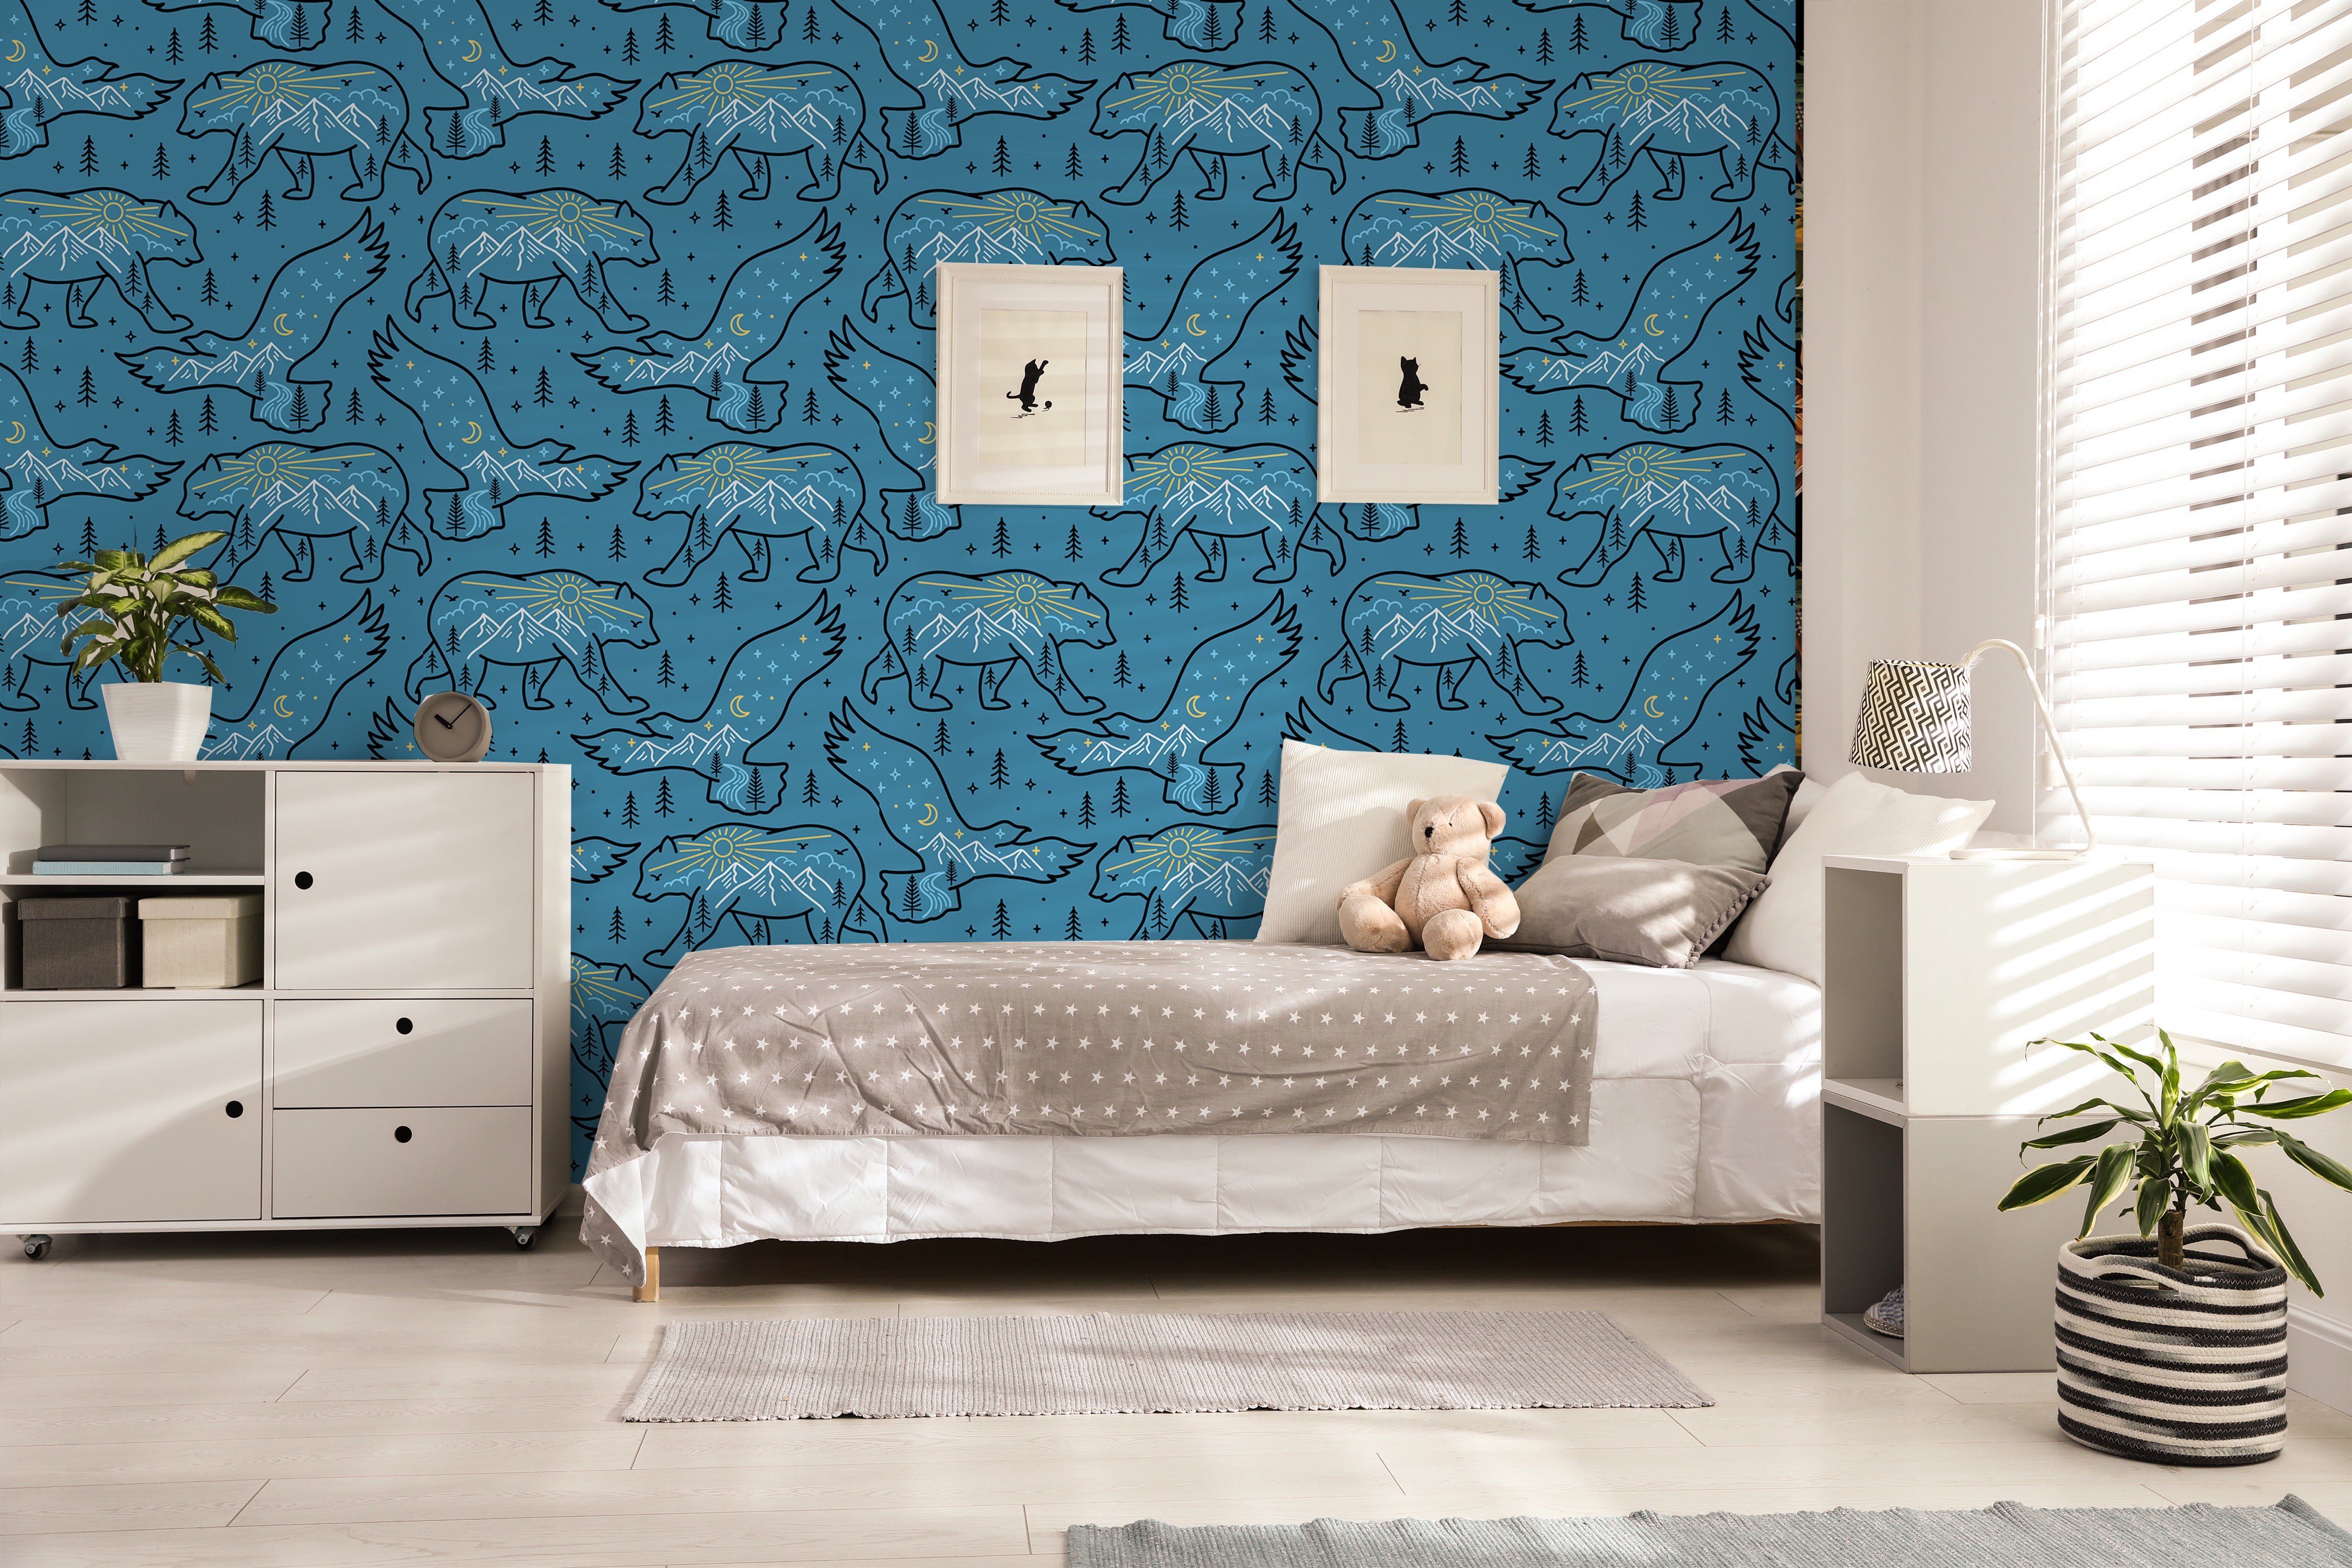 Blue Bird Animal Peel and Stick Removable Wallpaper 9623  On Sale  Bed  Bath  Beyond  34161022